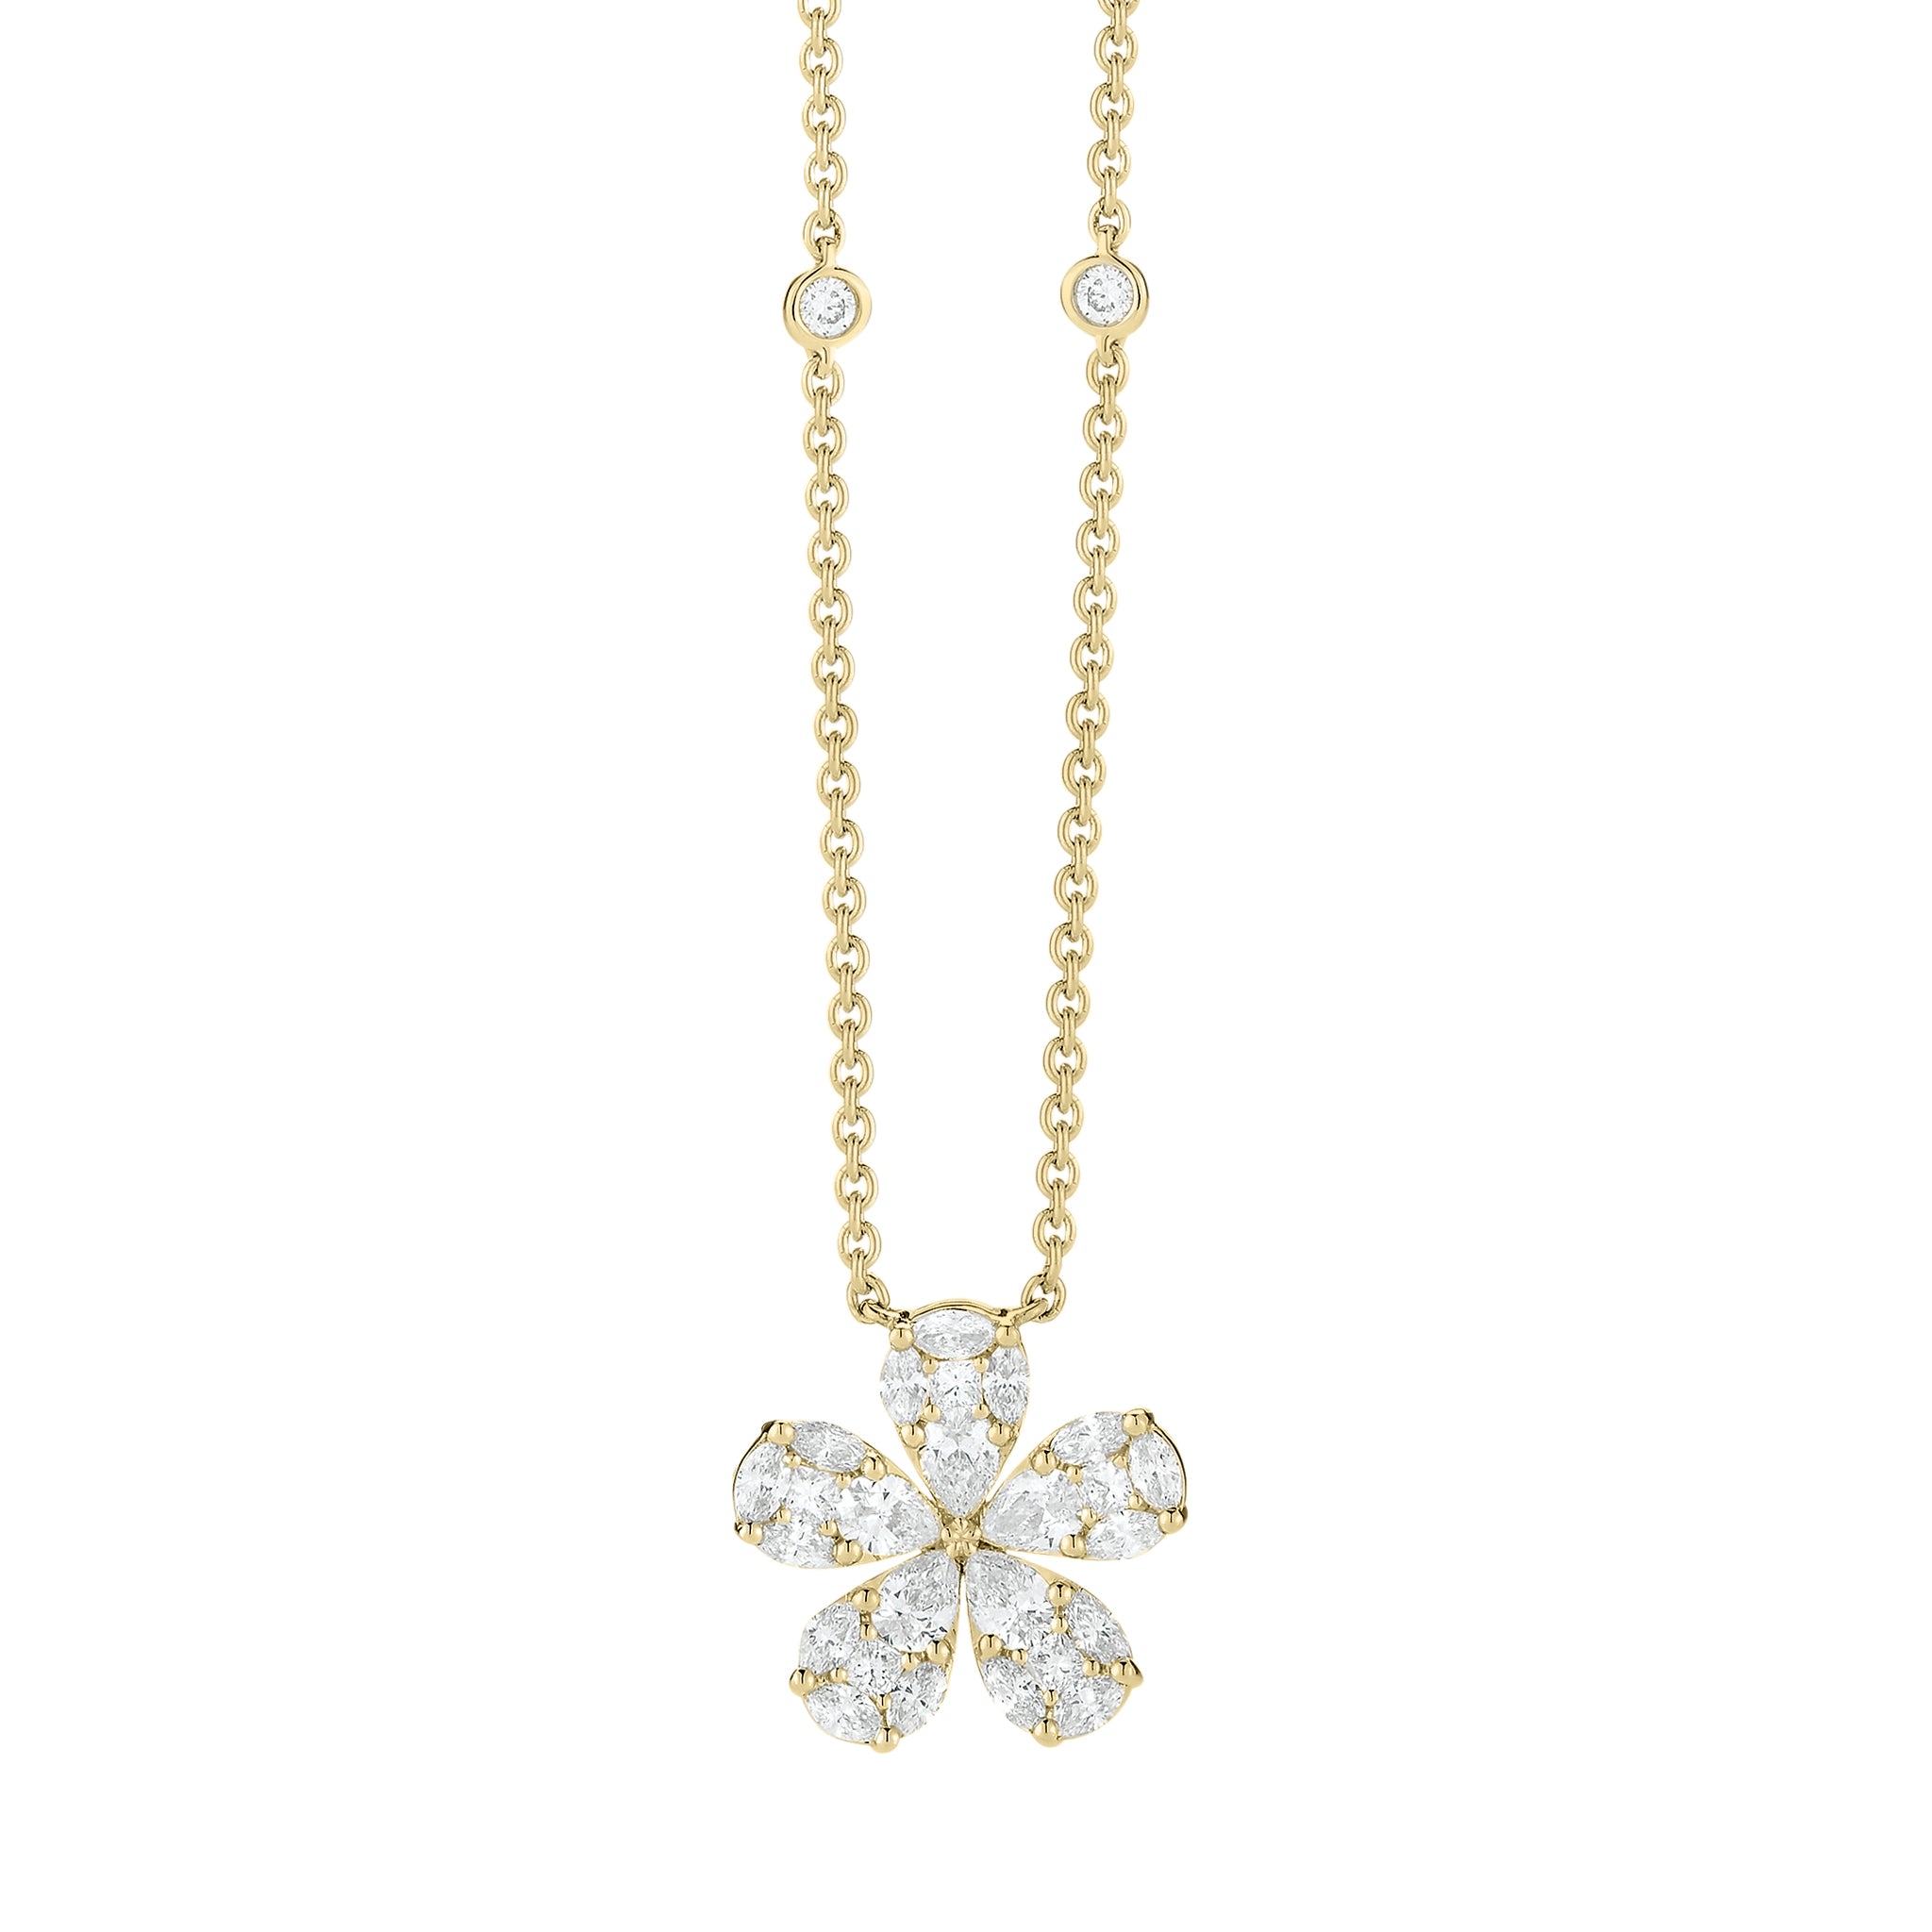 1.10 ct. t.w. Citrine and White Enamel Daisy Pendant Necklace in 18kt Gold  Over Sterling. 18